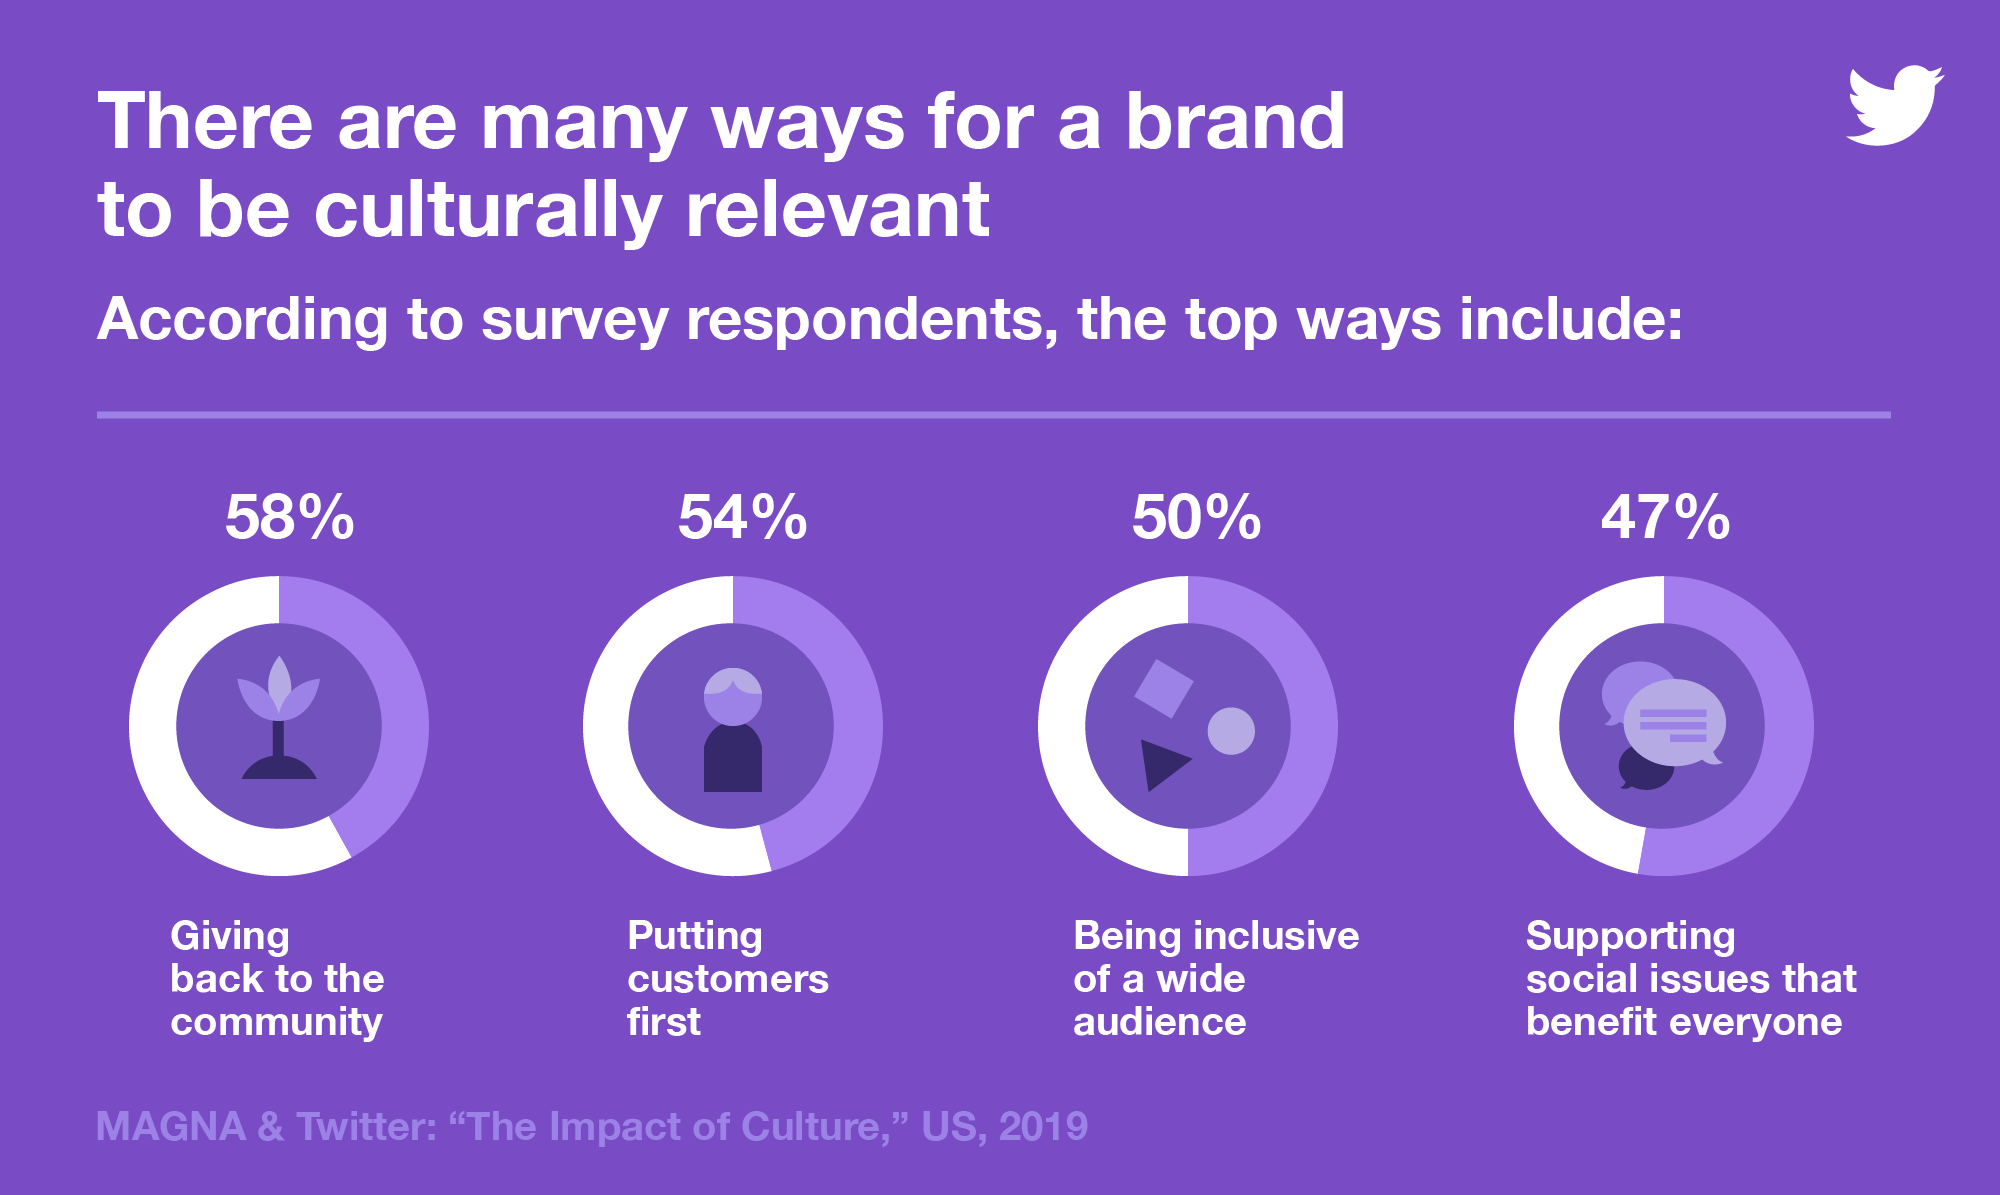 Infographic showing there are many ways for a brand to be culturally relevant.